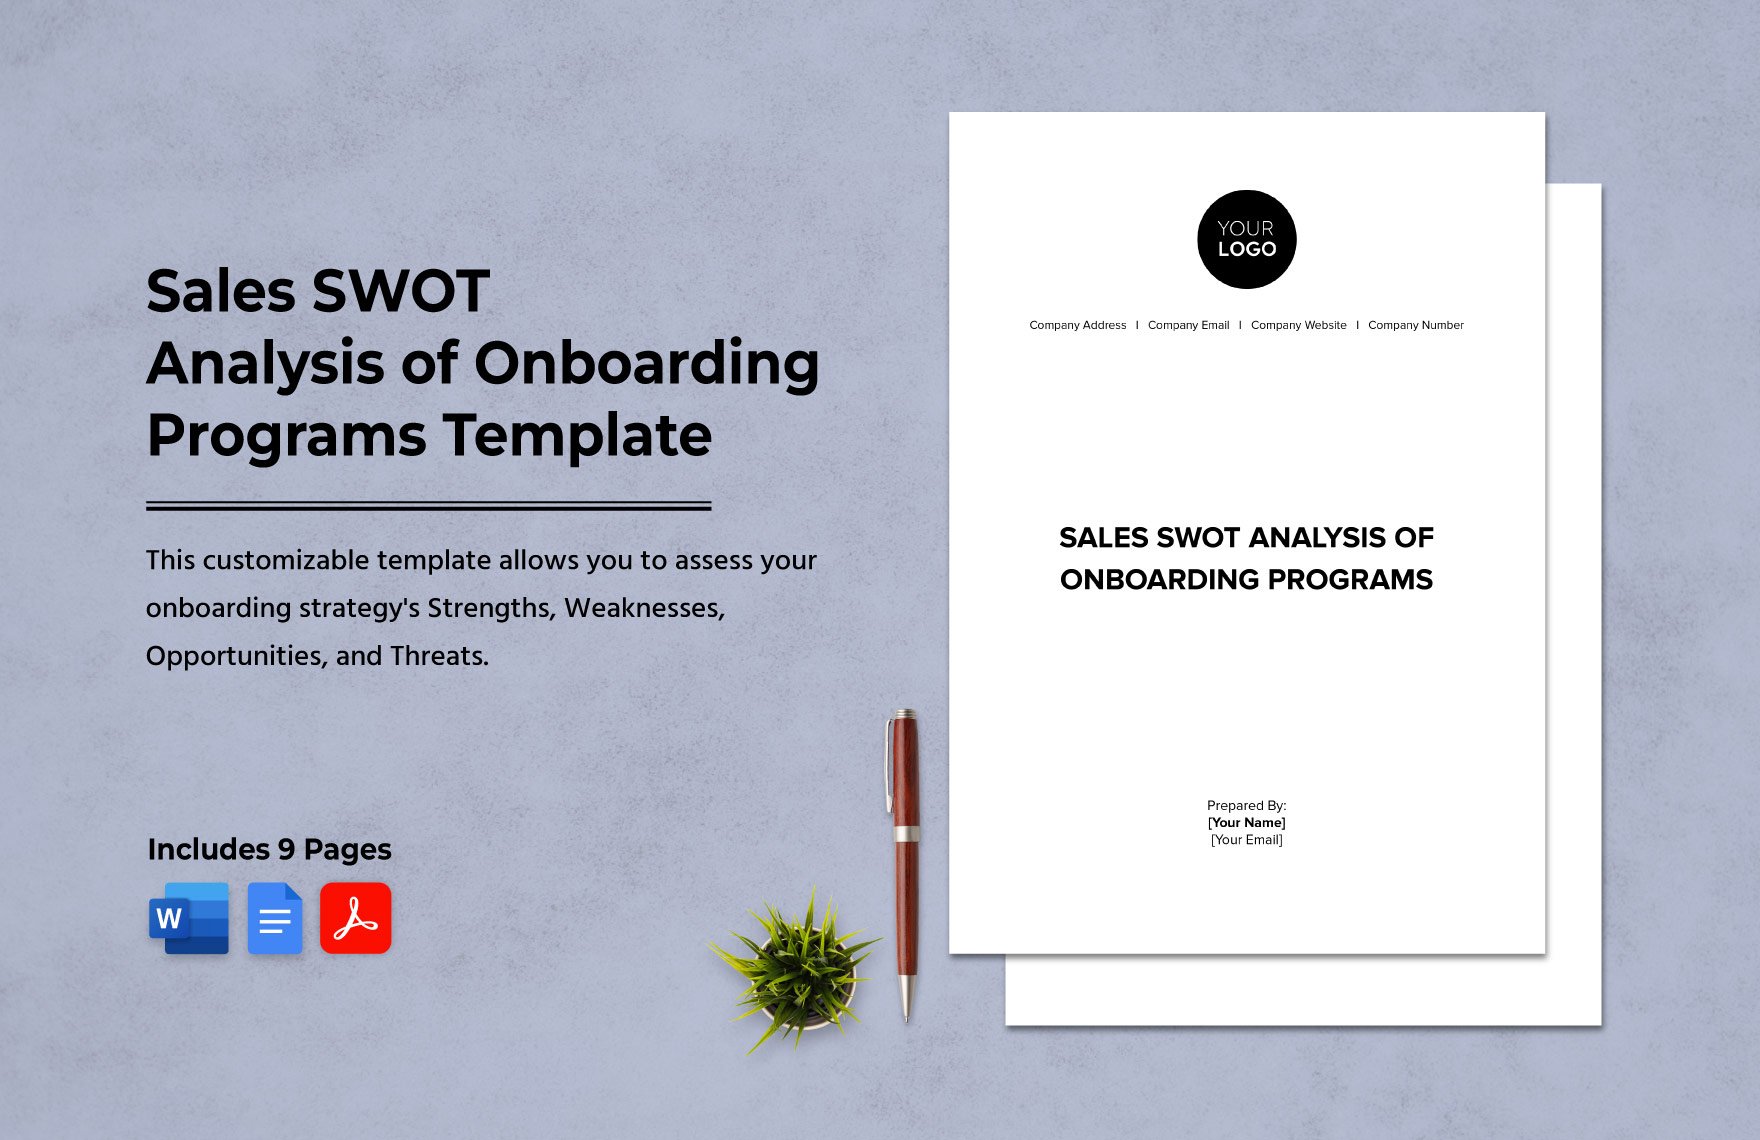 Sales SWOT Analysis of Onboarding Programs Template